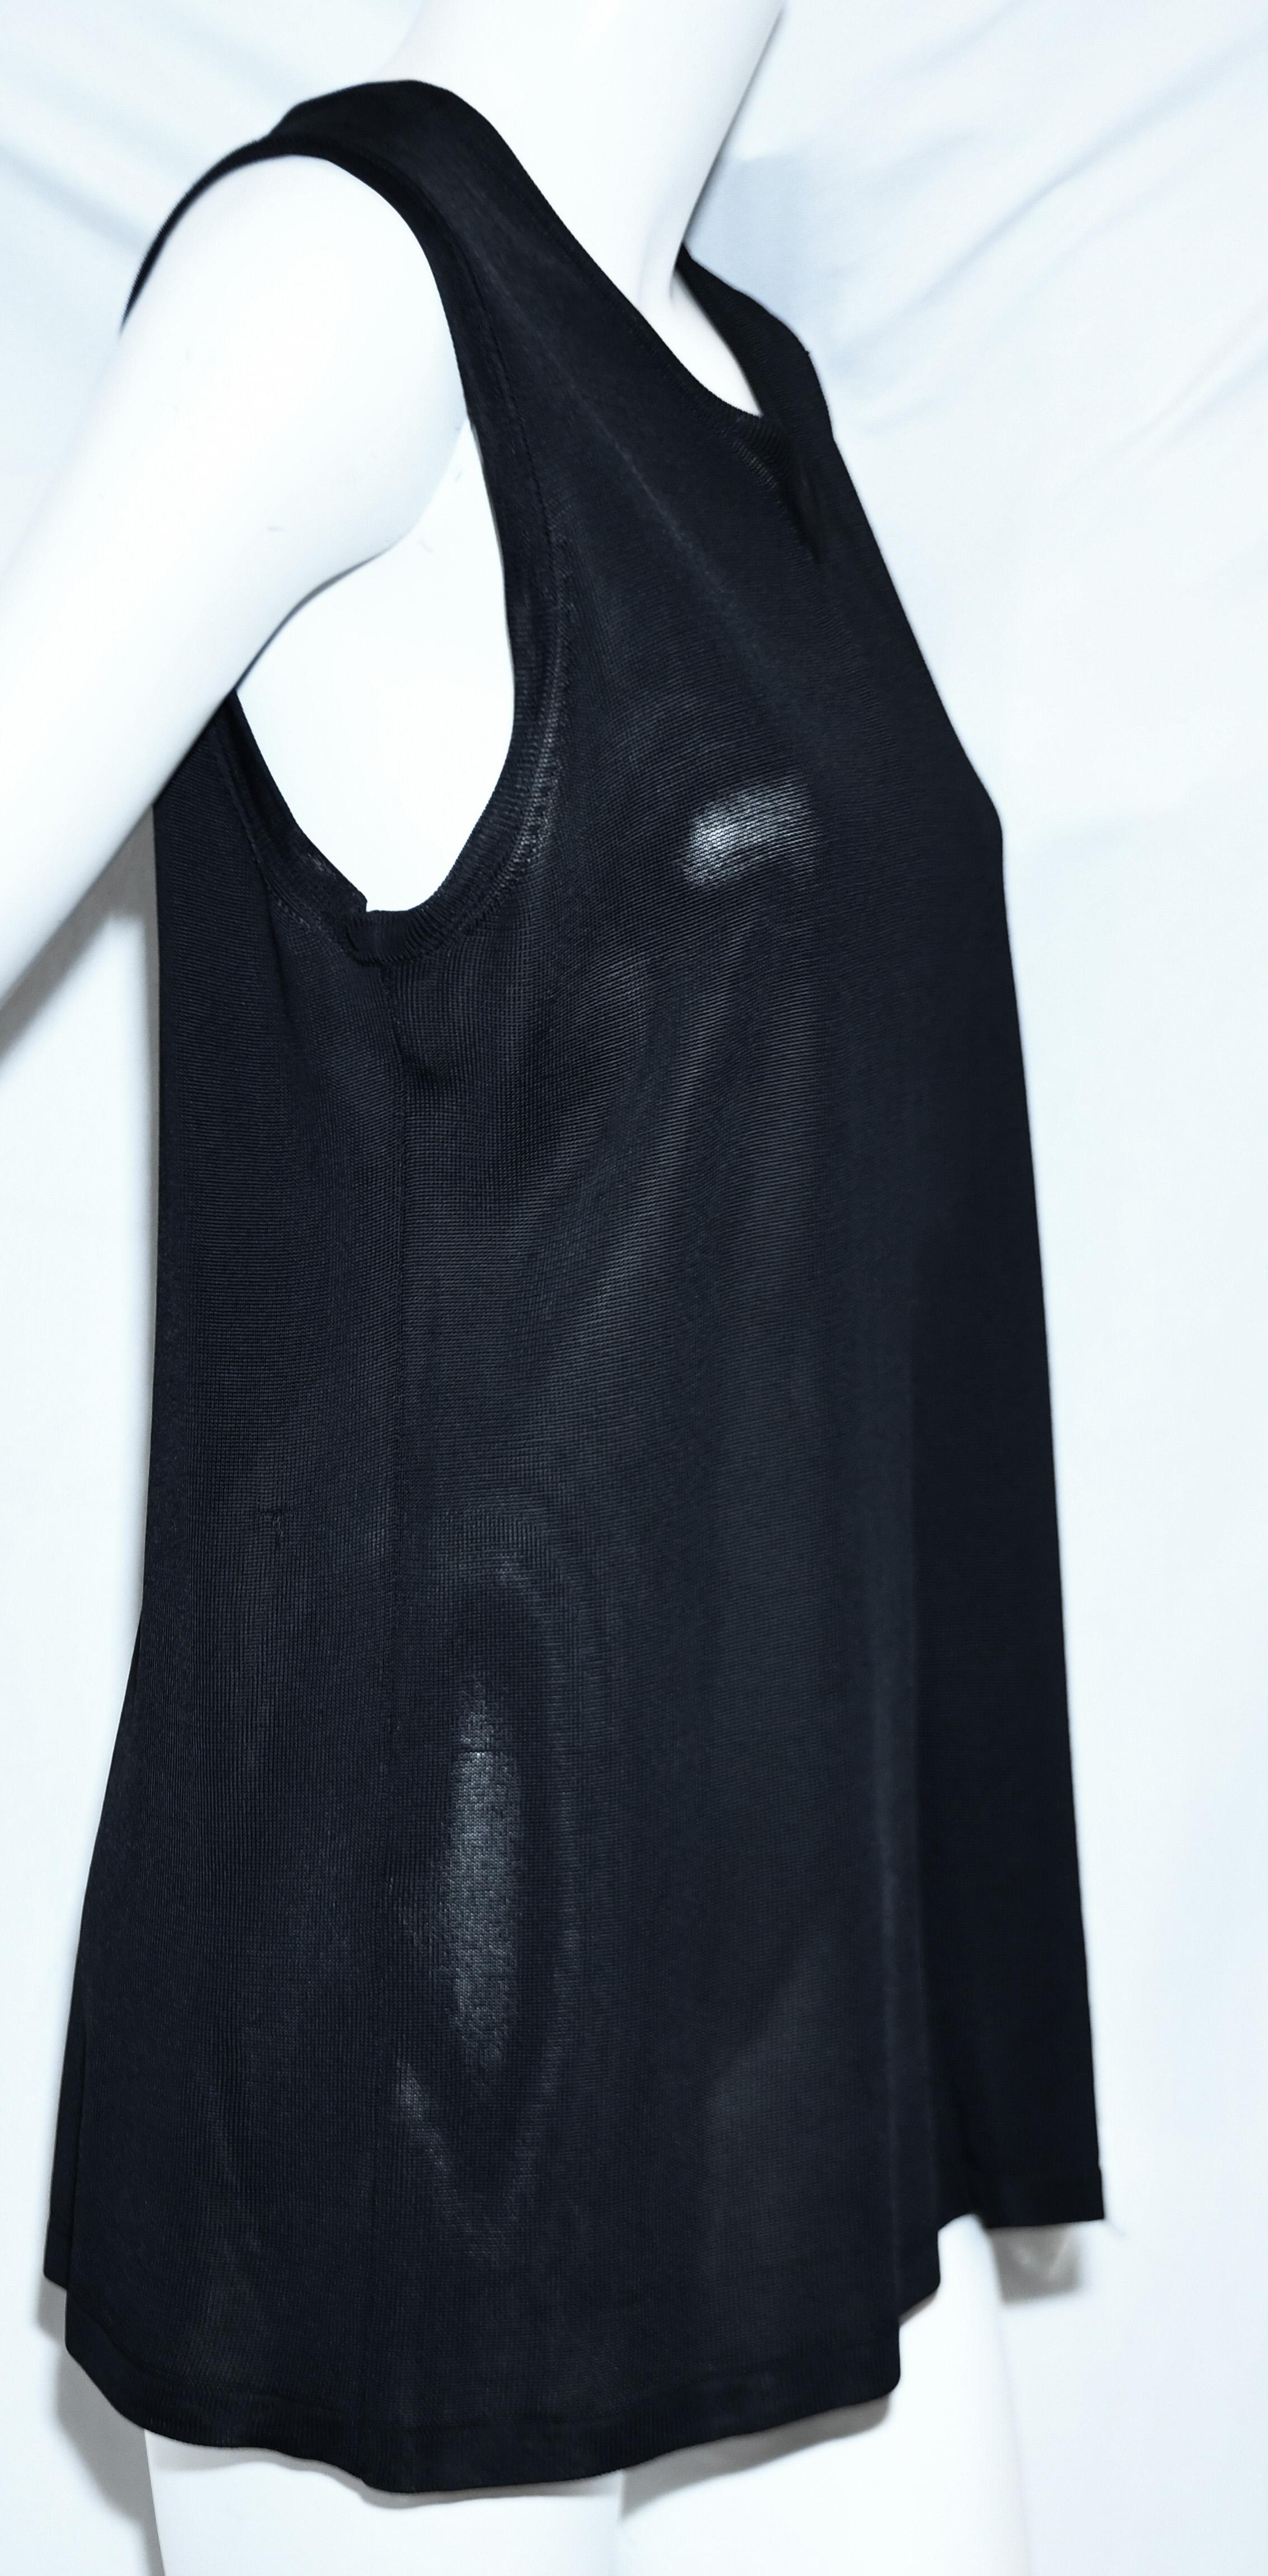 Hermes Black Semi Sheer Sleeveless Top  In Excellent Condition For Sale In Palm Beach, FL